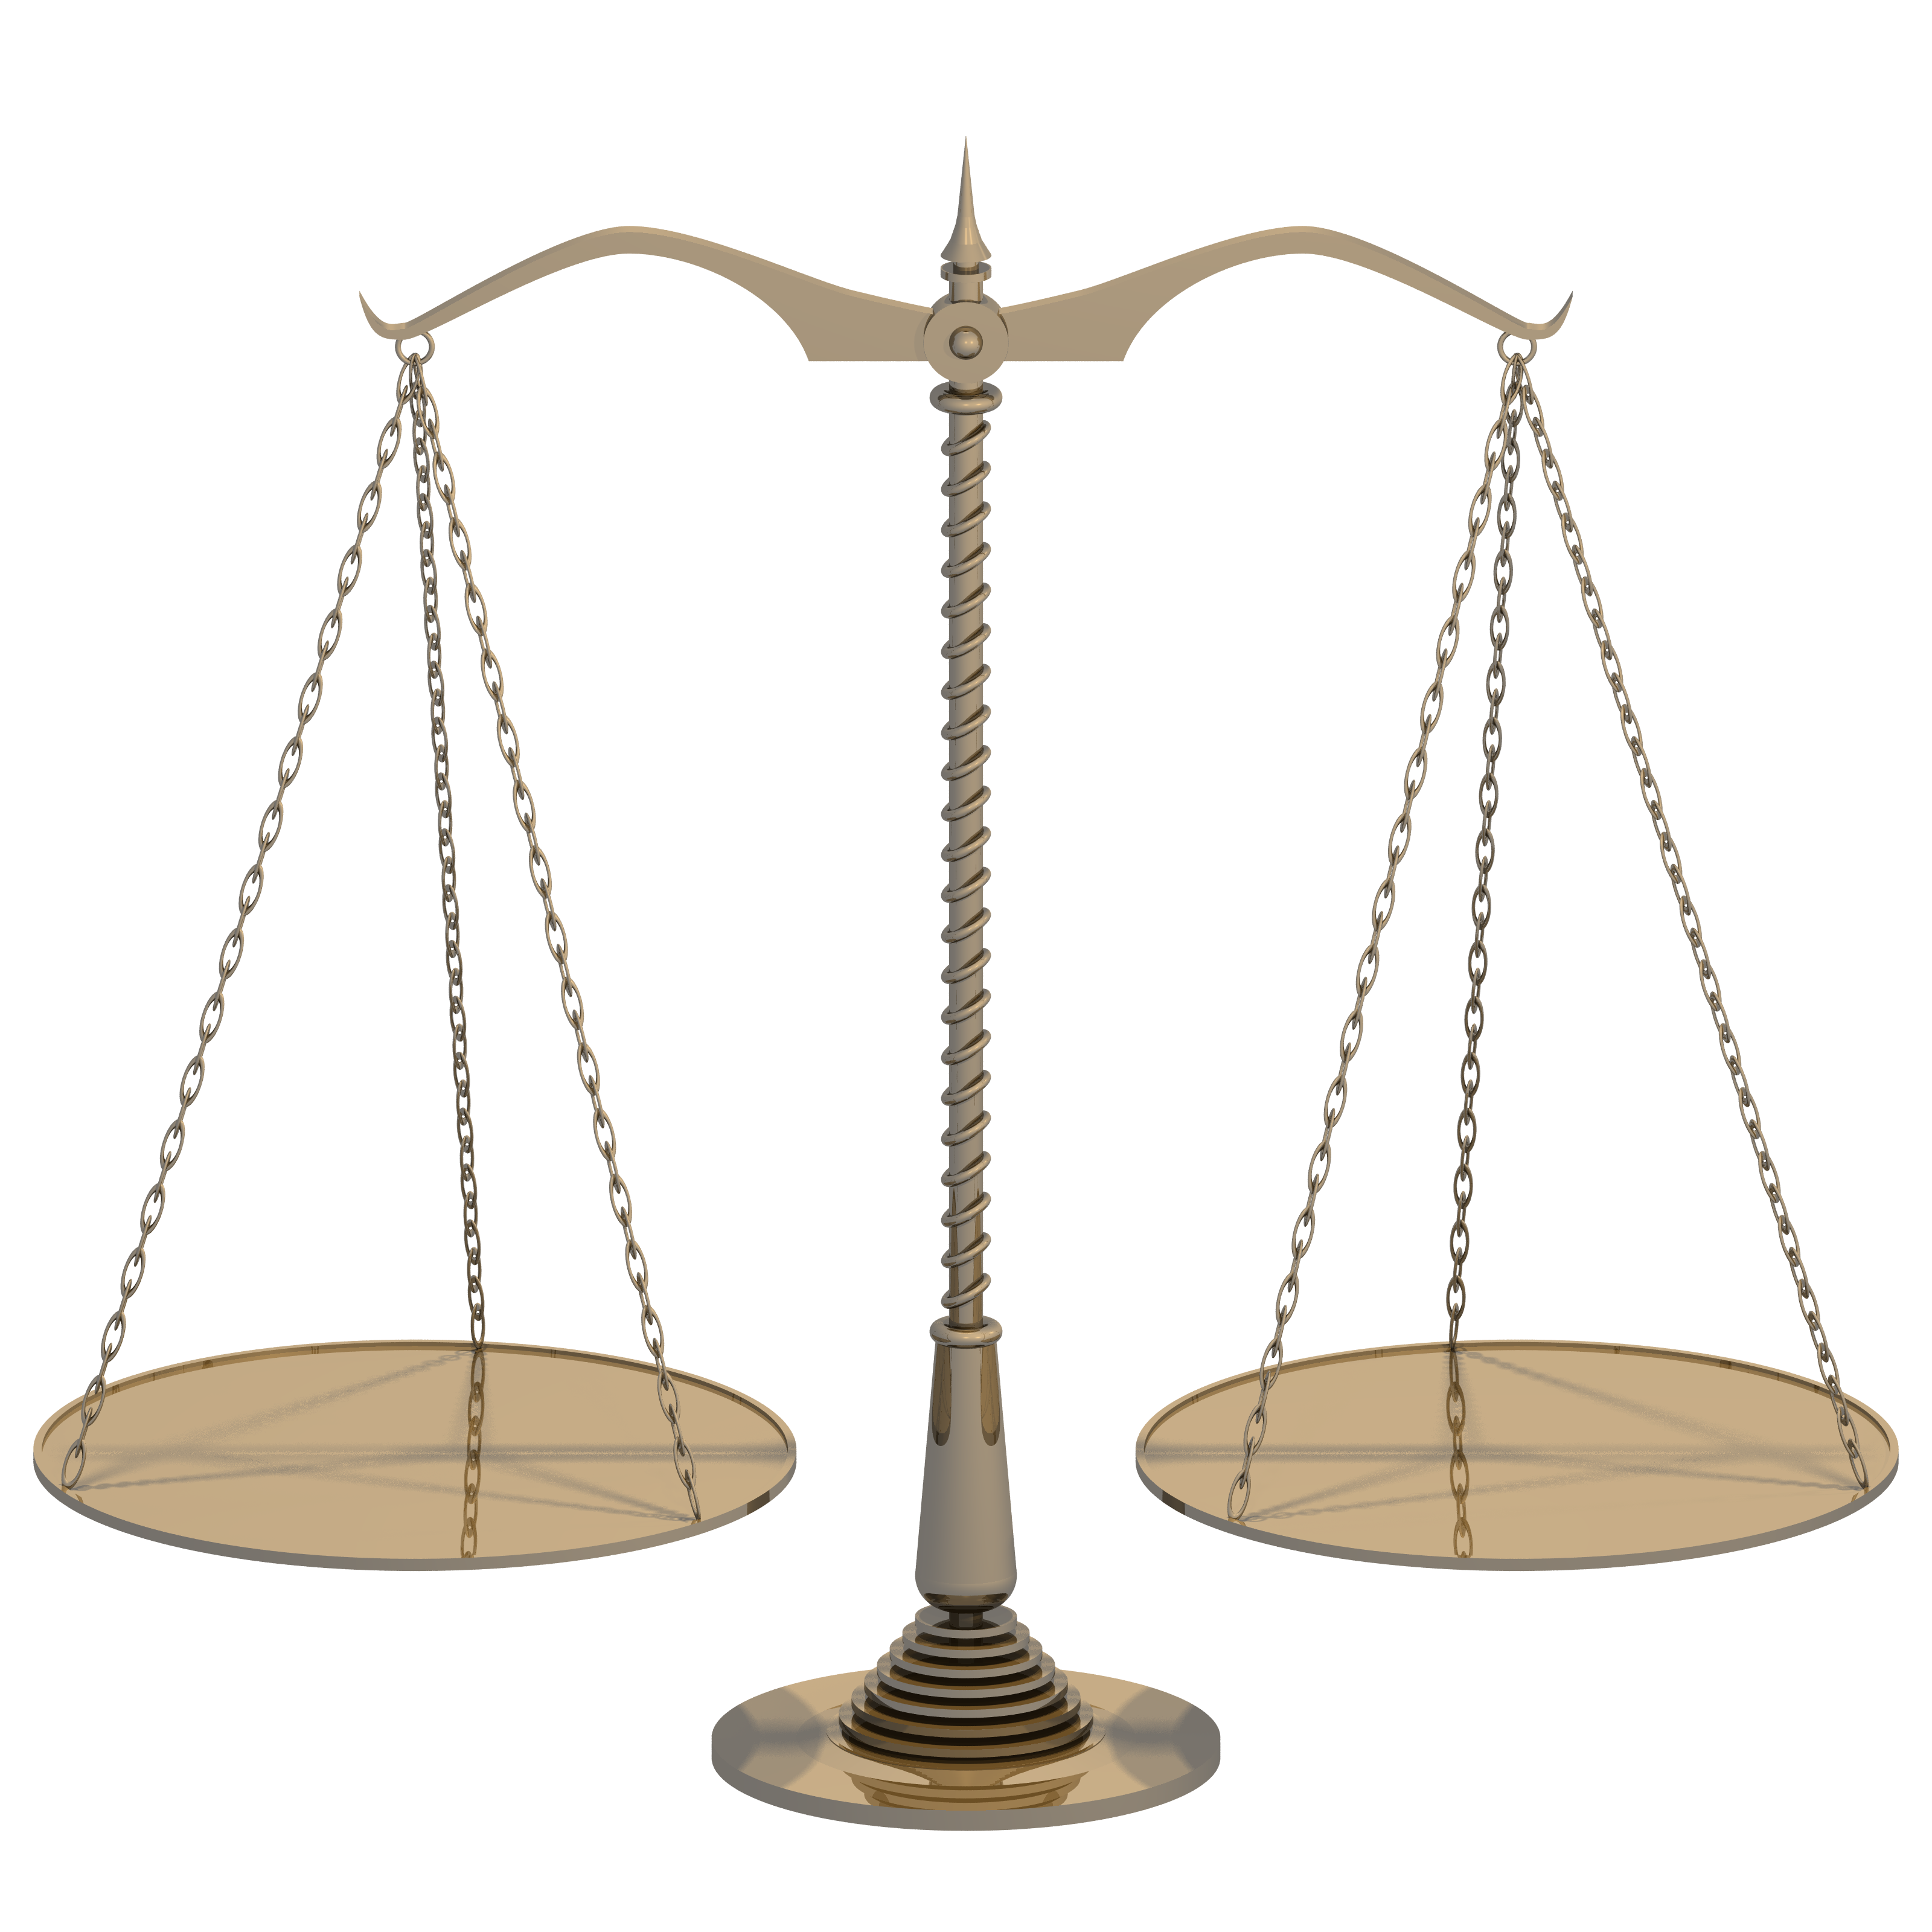 Science Balance Scale Clip Art Images Of Balance Scales